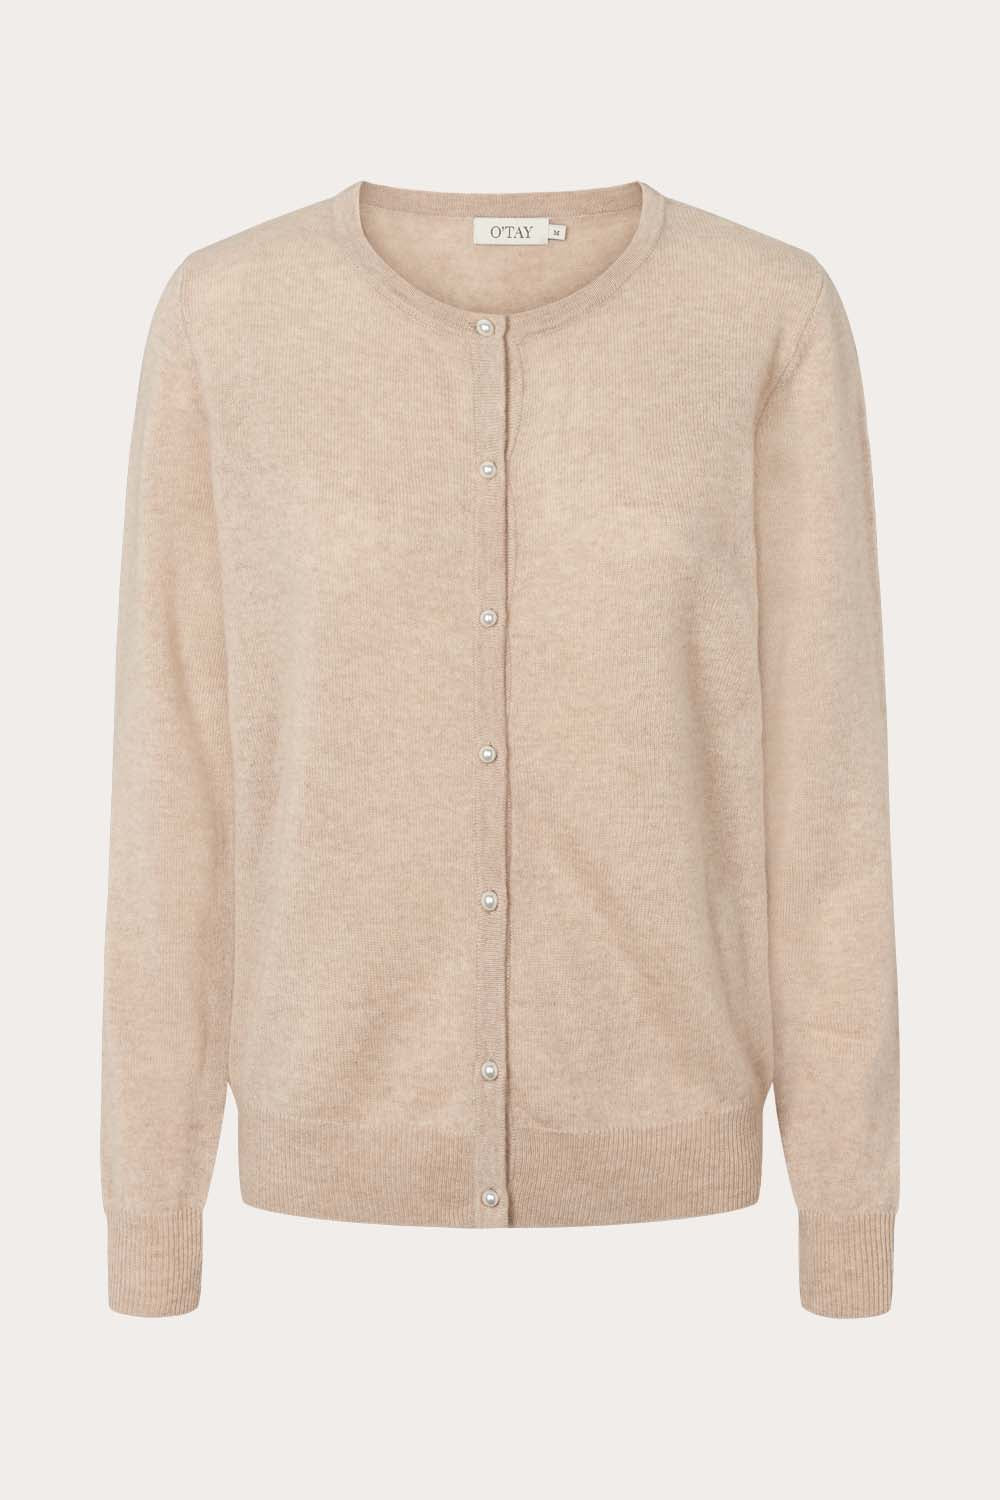 Cashmere Cardigans | Shop exquisite knitted cardigans in cashmere 